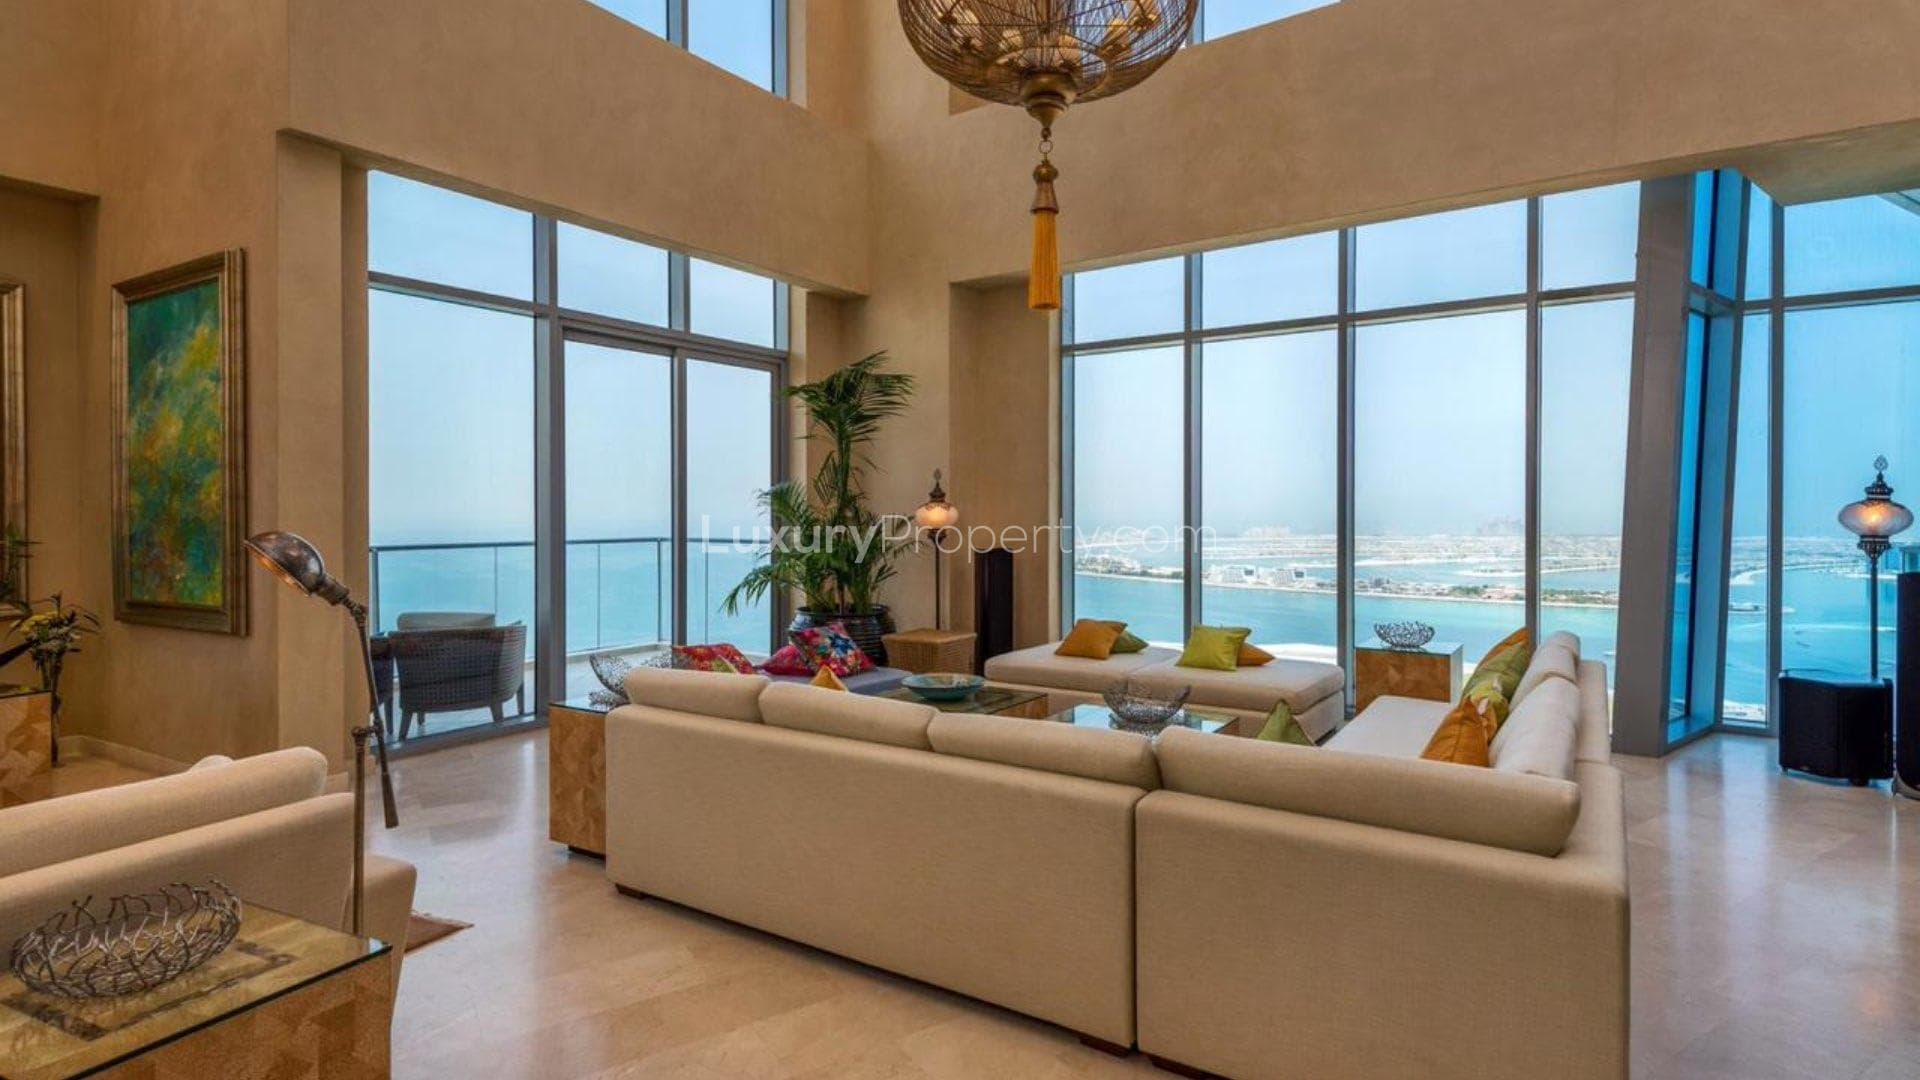 4 Bedroom Penthouse For Sale Trident Grand Residence Lp17461 1744350c4d7f5000.jpg